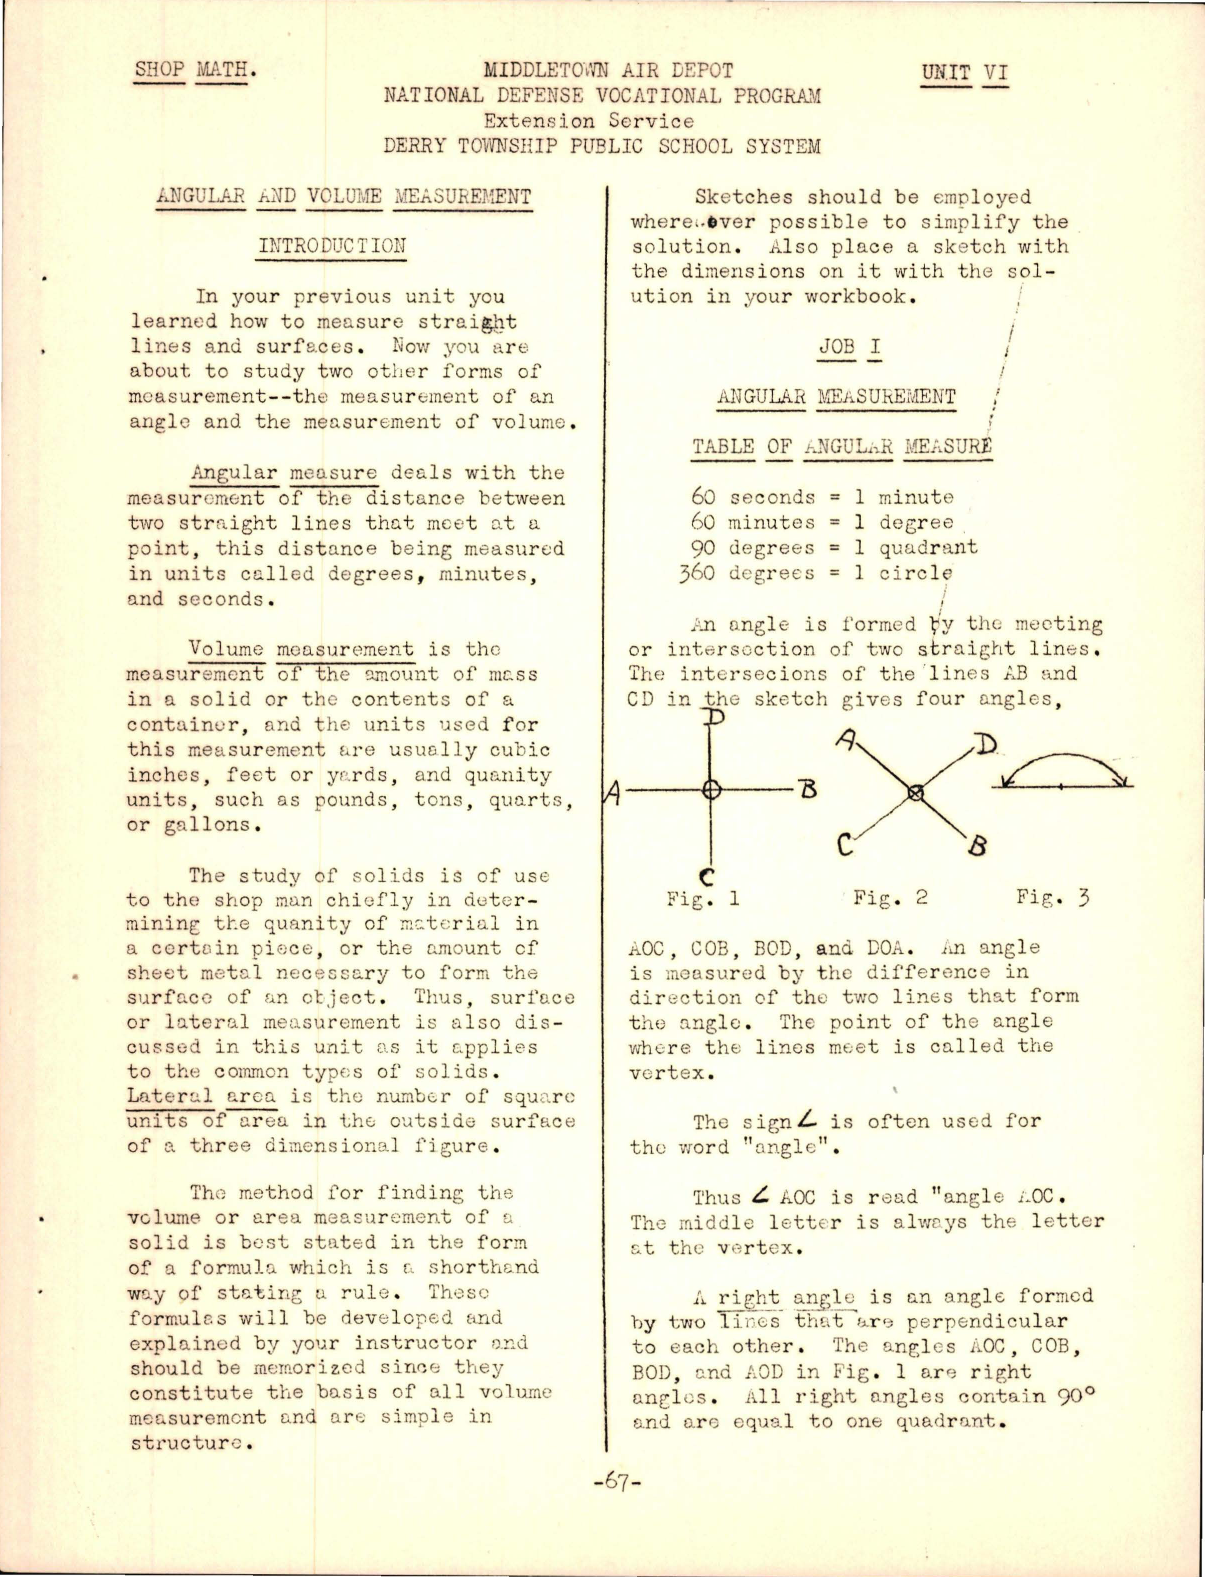 Sample page 5 from AirCorps Library document: Practical Shop Mathematics for Aviation Mechanics 